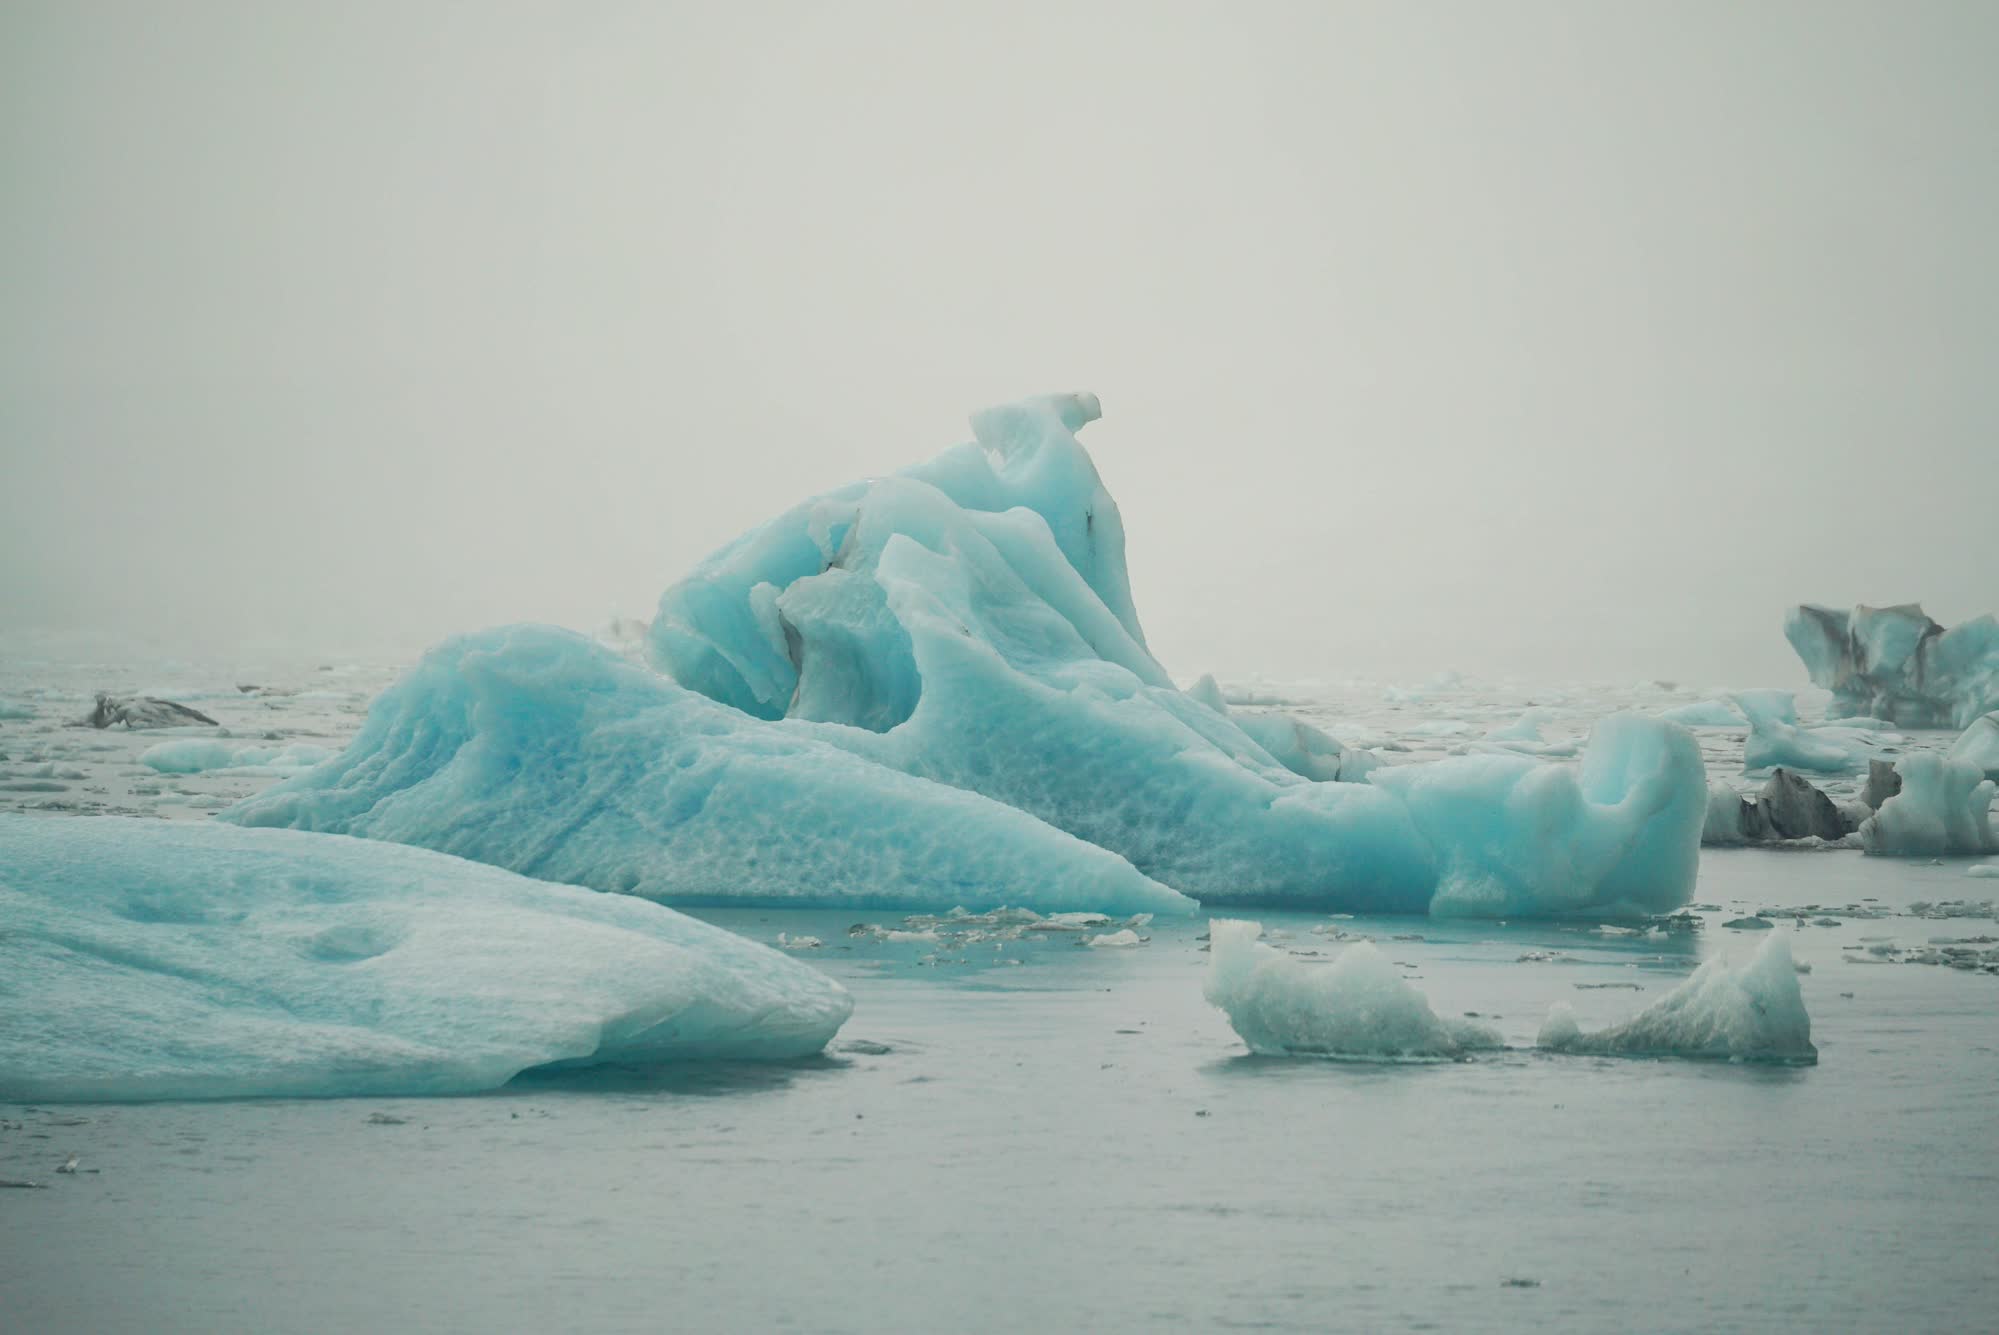 Large chunks of sea ice float in a lagoon.